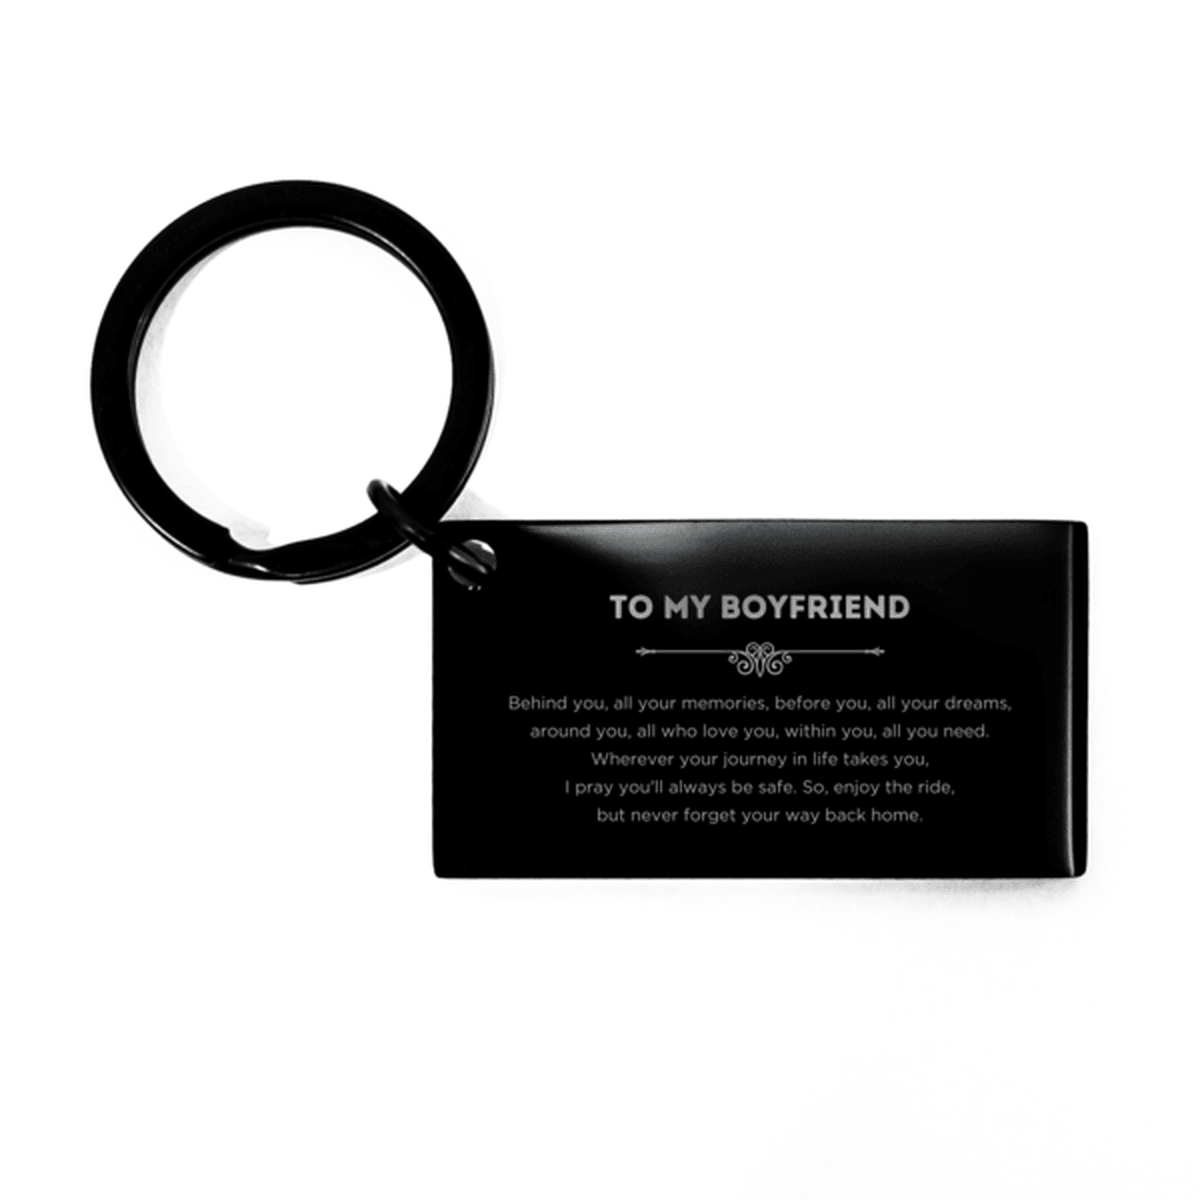 To My Boyfriend Gifts, Inspirational Boyfriend Keychain, Sentimental Birthday Christmas Unique Gifts For Boyfriend Behind you, all your memories, before you, all your dreams, around you, all who love you, within you, all you need - Mallard Moon Gift Shop